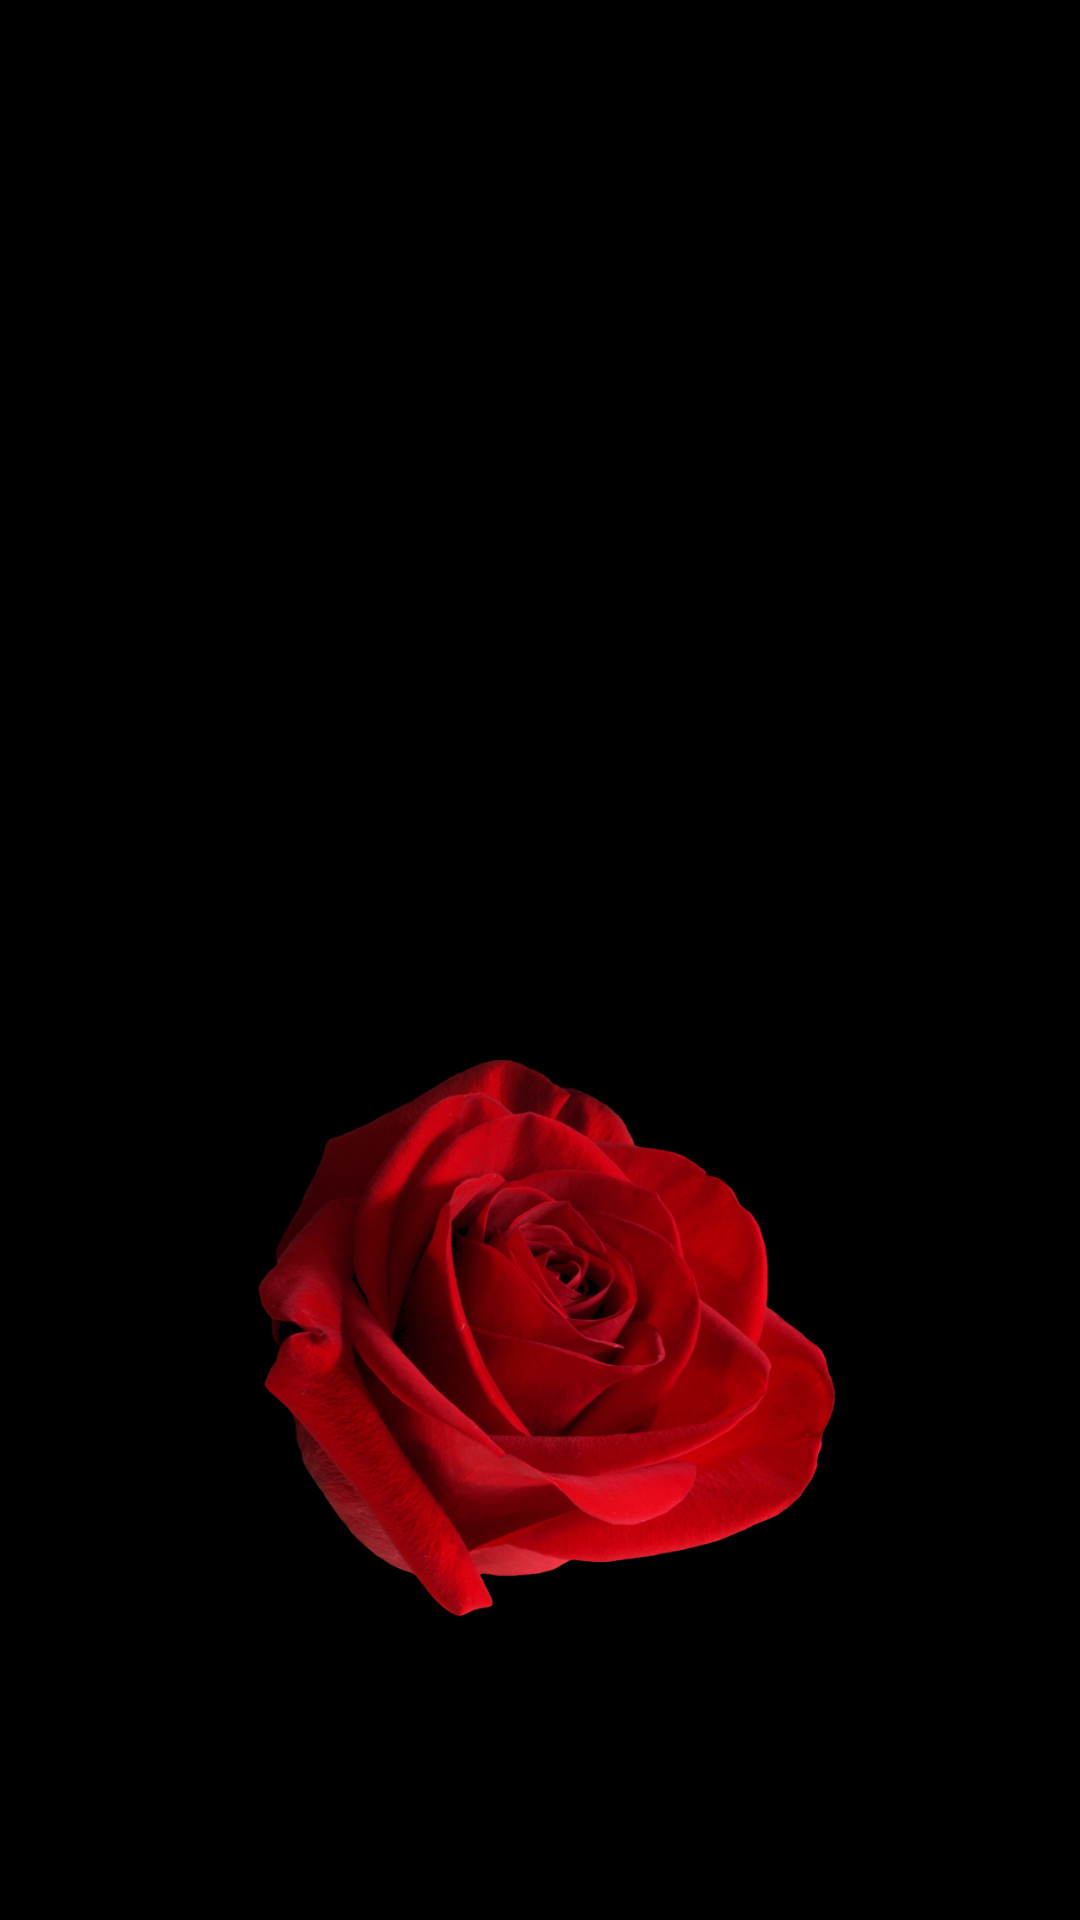 Red Rose Cell Phone Wallpaper By Mitsubishiman